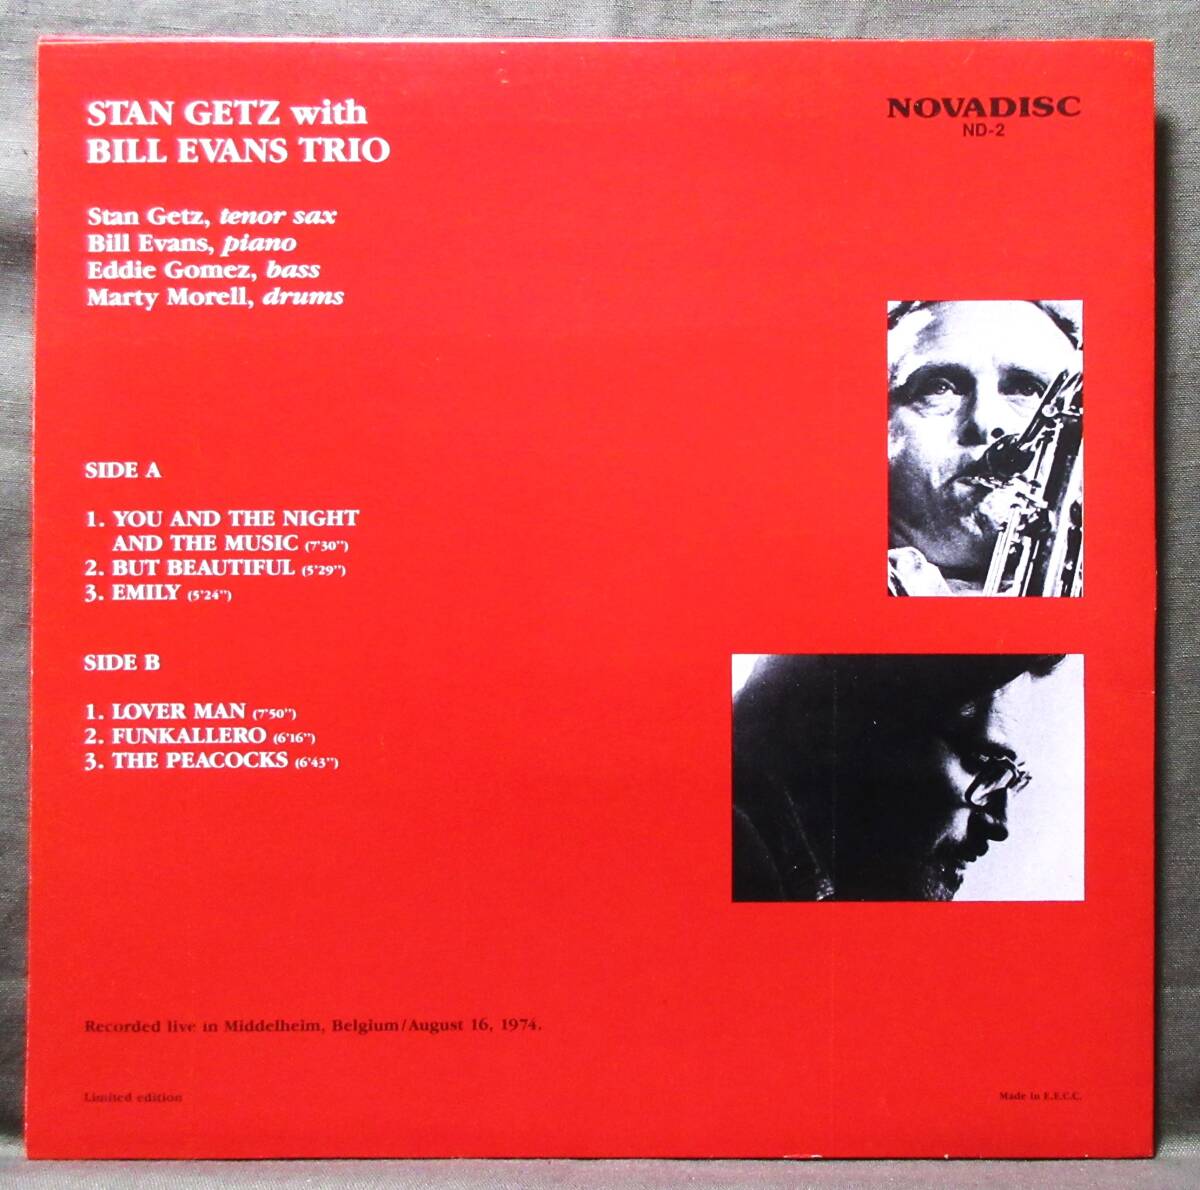 (LP) 美品! EU/オリジナル STAN GETZ With BILL EVANS TRIO [LIVE IN BELGIUM 1974] Limited Edition/Made in E.E.C.C./NOVADISC/ND-2_画像2